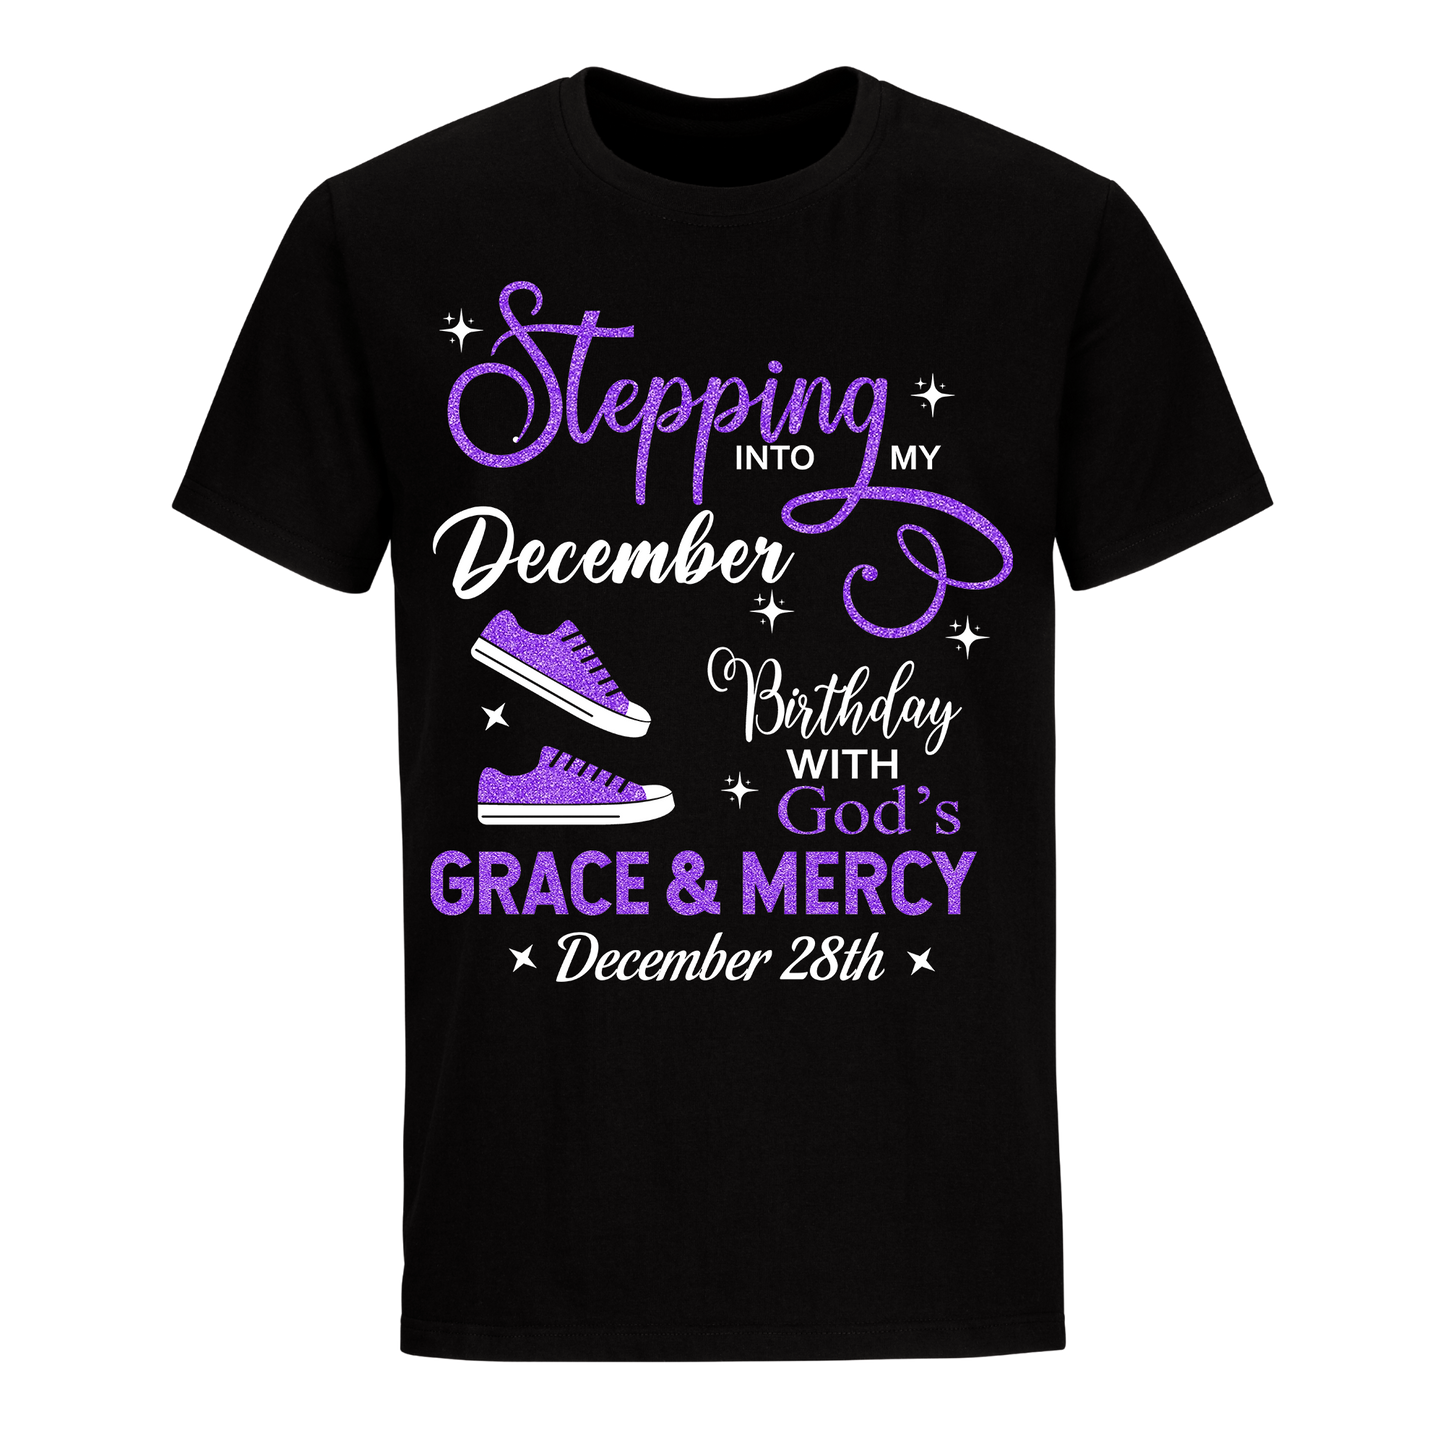 DECEMBER 28 GRACE AND MERCY